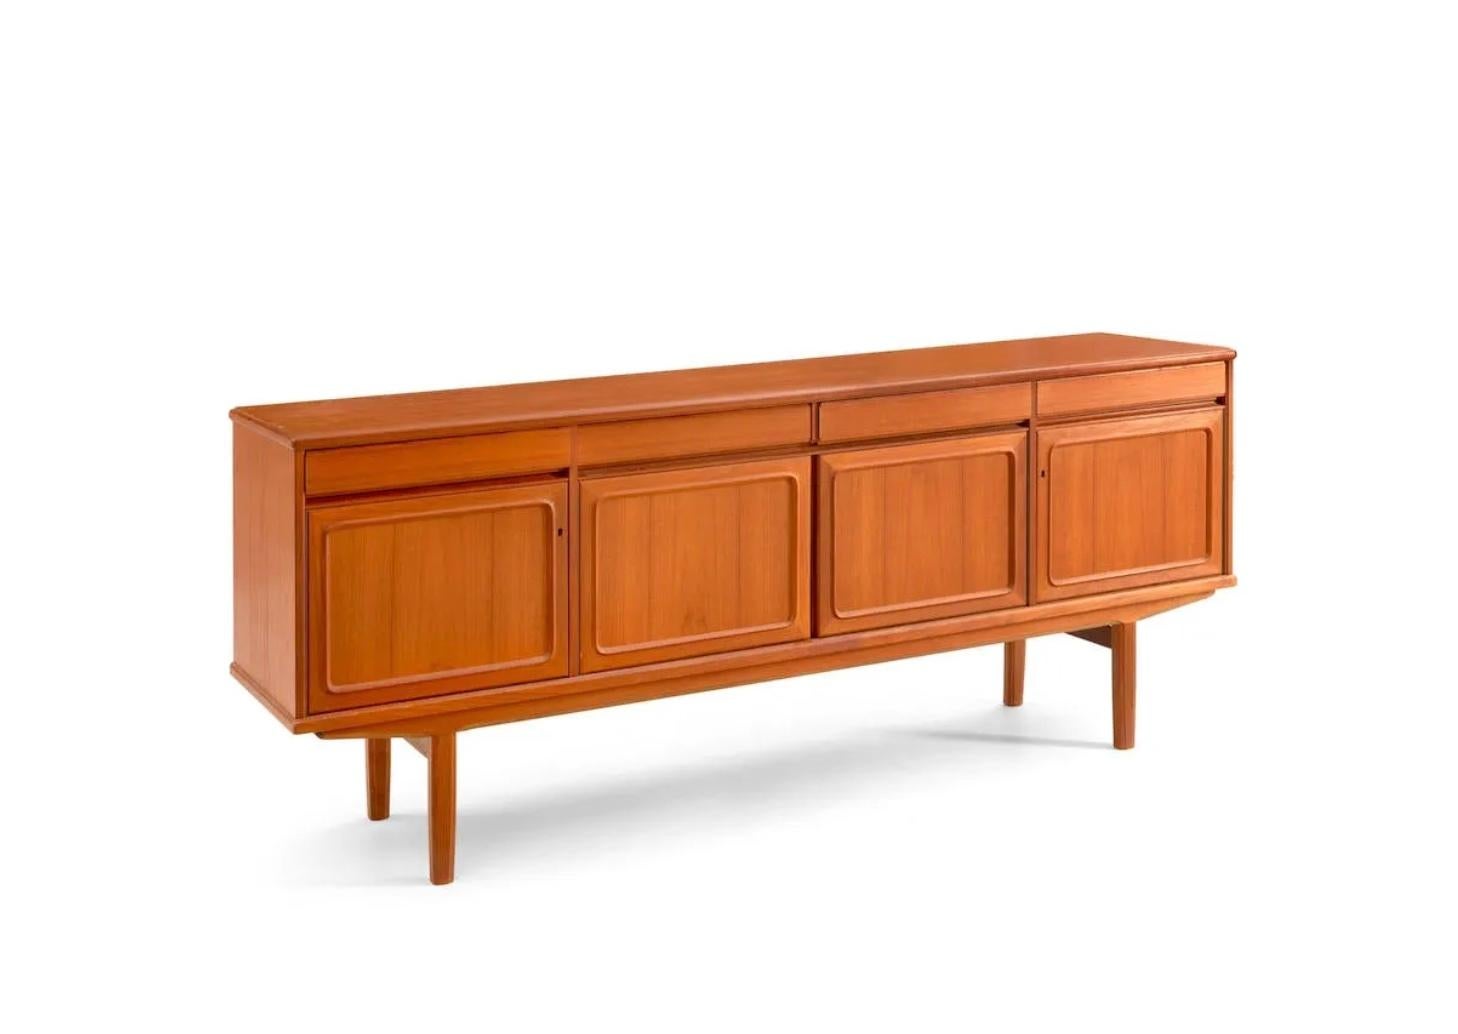 Beautiful Mid Century Scandinavian modern teak credenza sideboard.
Made in Norway, c. 1965. Wonderful light teak wood with (4) upper short drawers and (4) lower cabinet doors. The cabinet doors open to interior with shelving. Has Key holes to lock